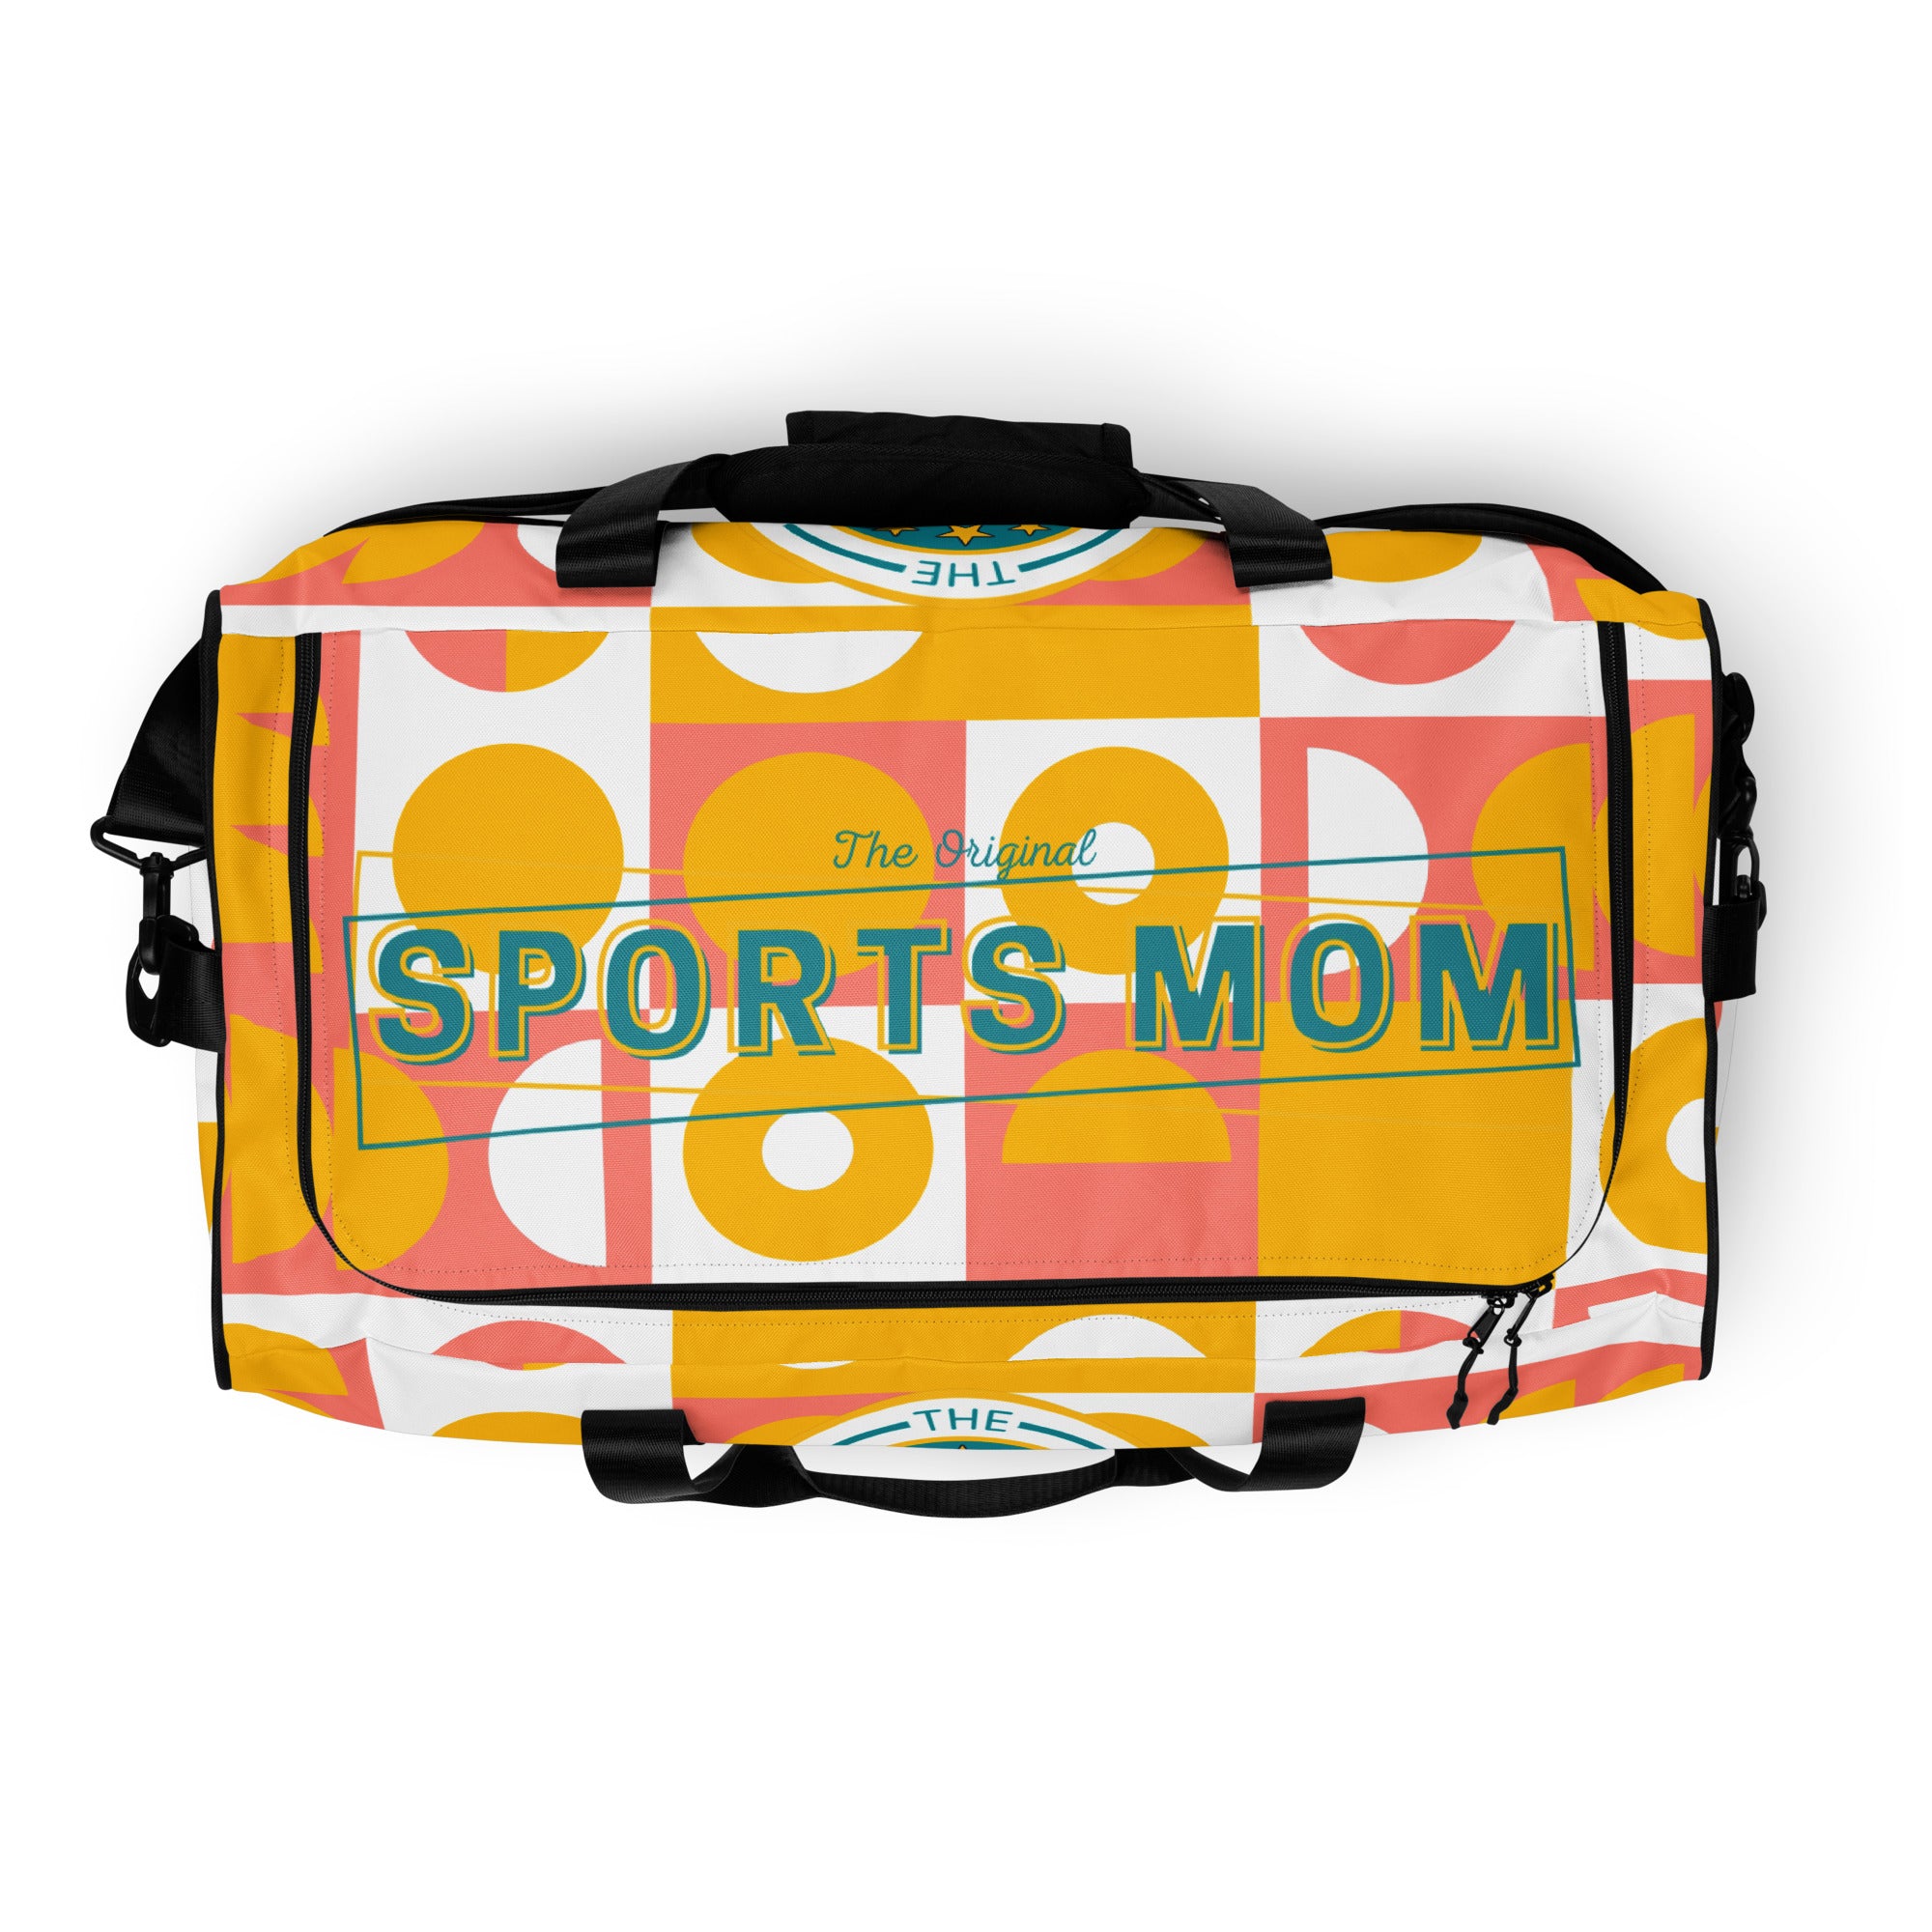 Sports Mom Ultimate Duffle Bag - The 7D's